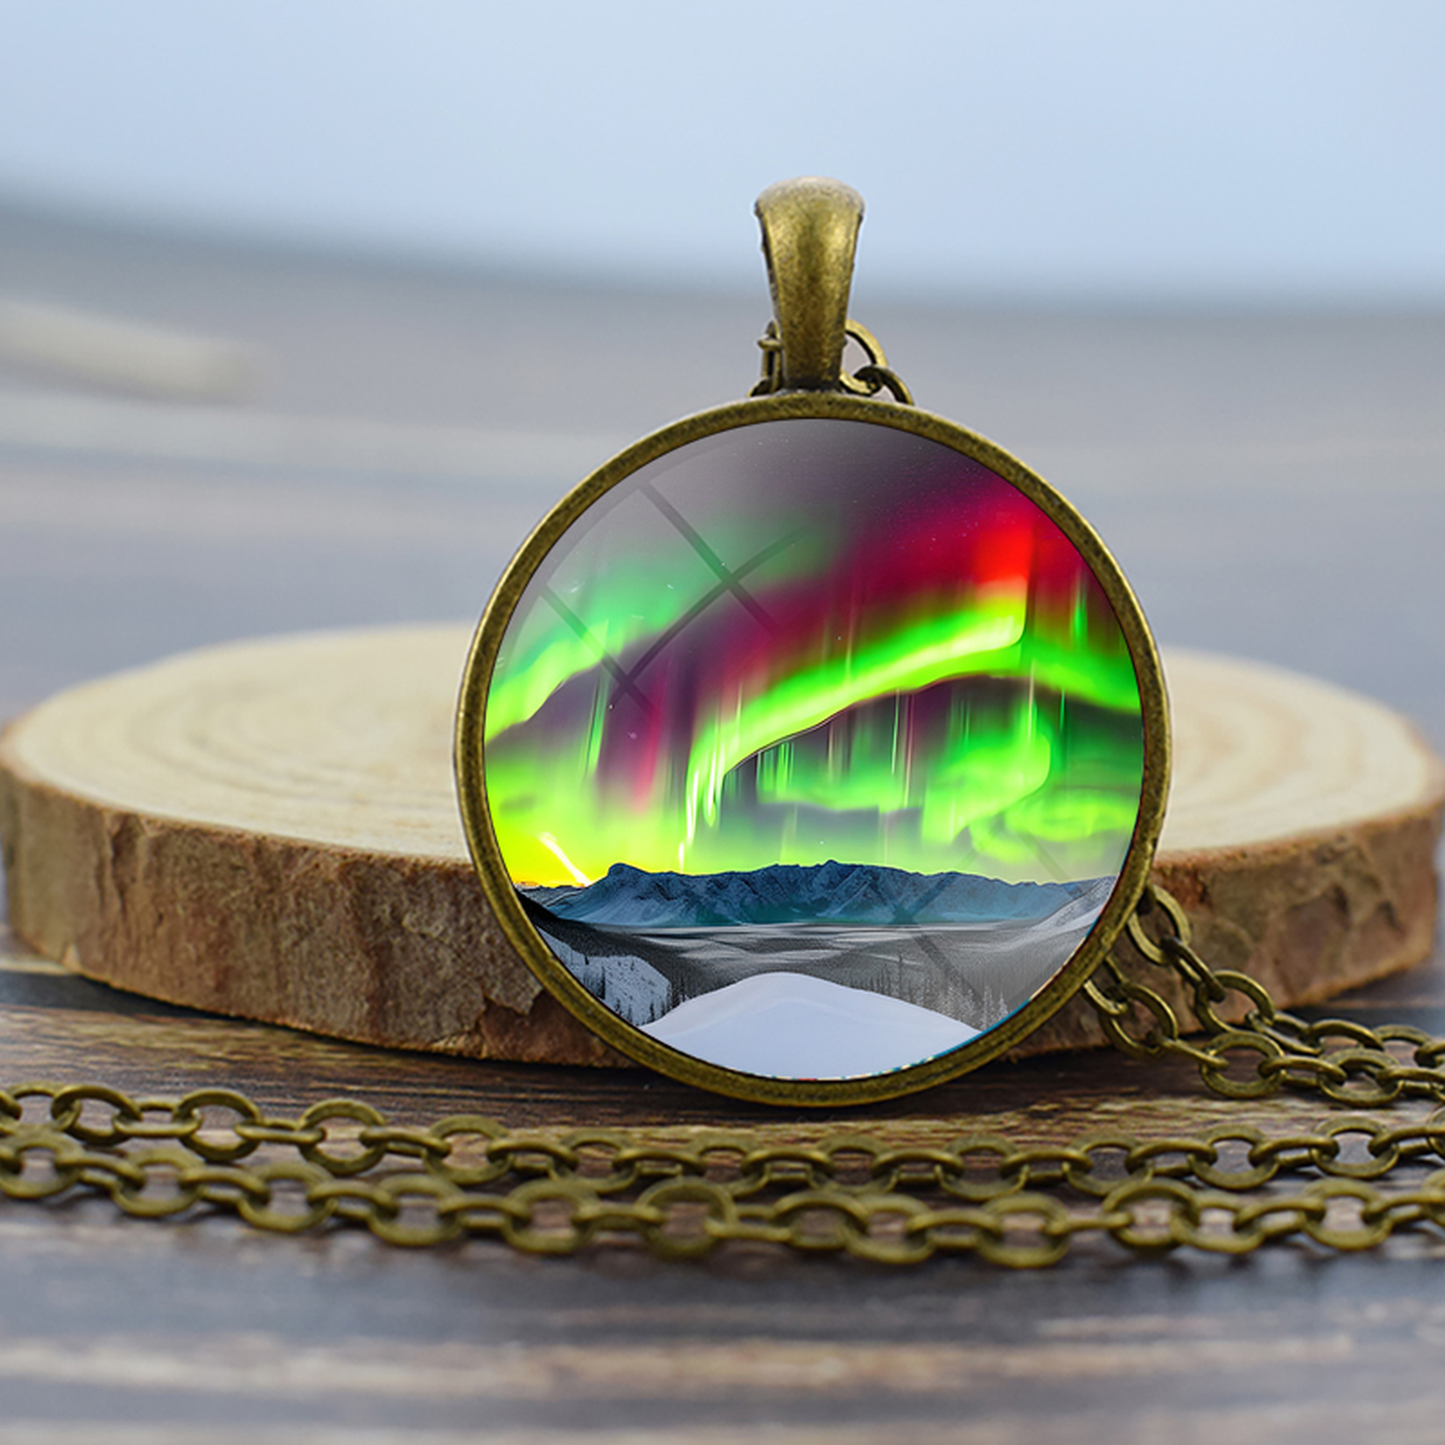 Unique Aurora Borealis Bronze Necklace - Northern Light Jewelry - Glass Dome Pendent Necklace - Perfect Aurora Lovers Gift 9